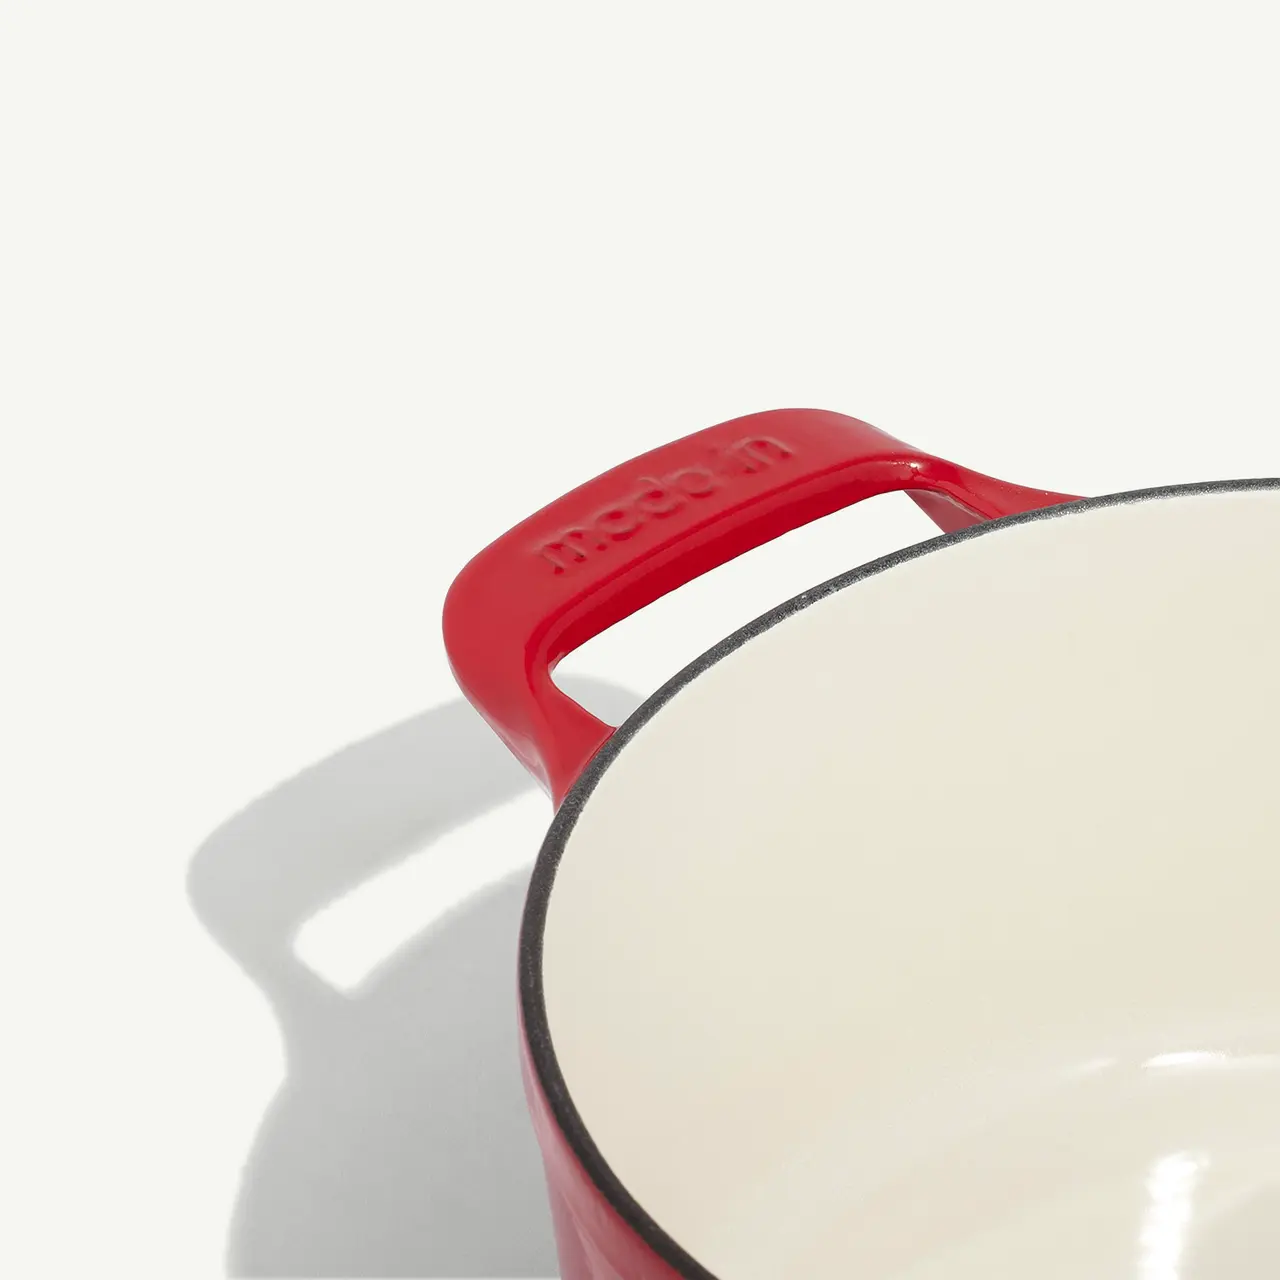 A red enameled pot with a visible logo on the handle casts a shadow on a light background.